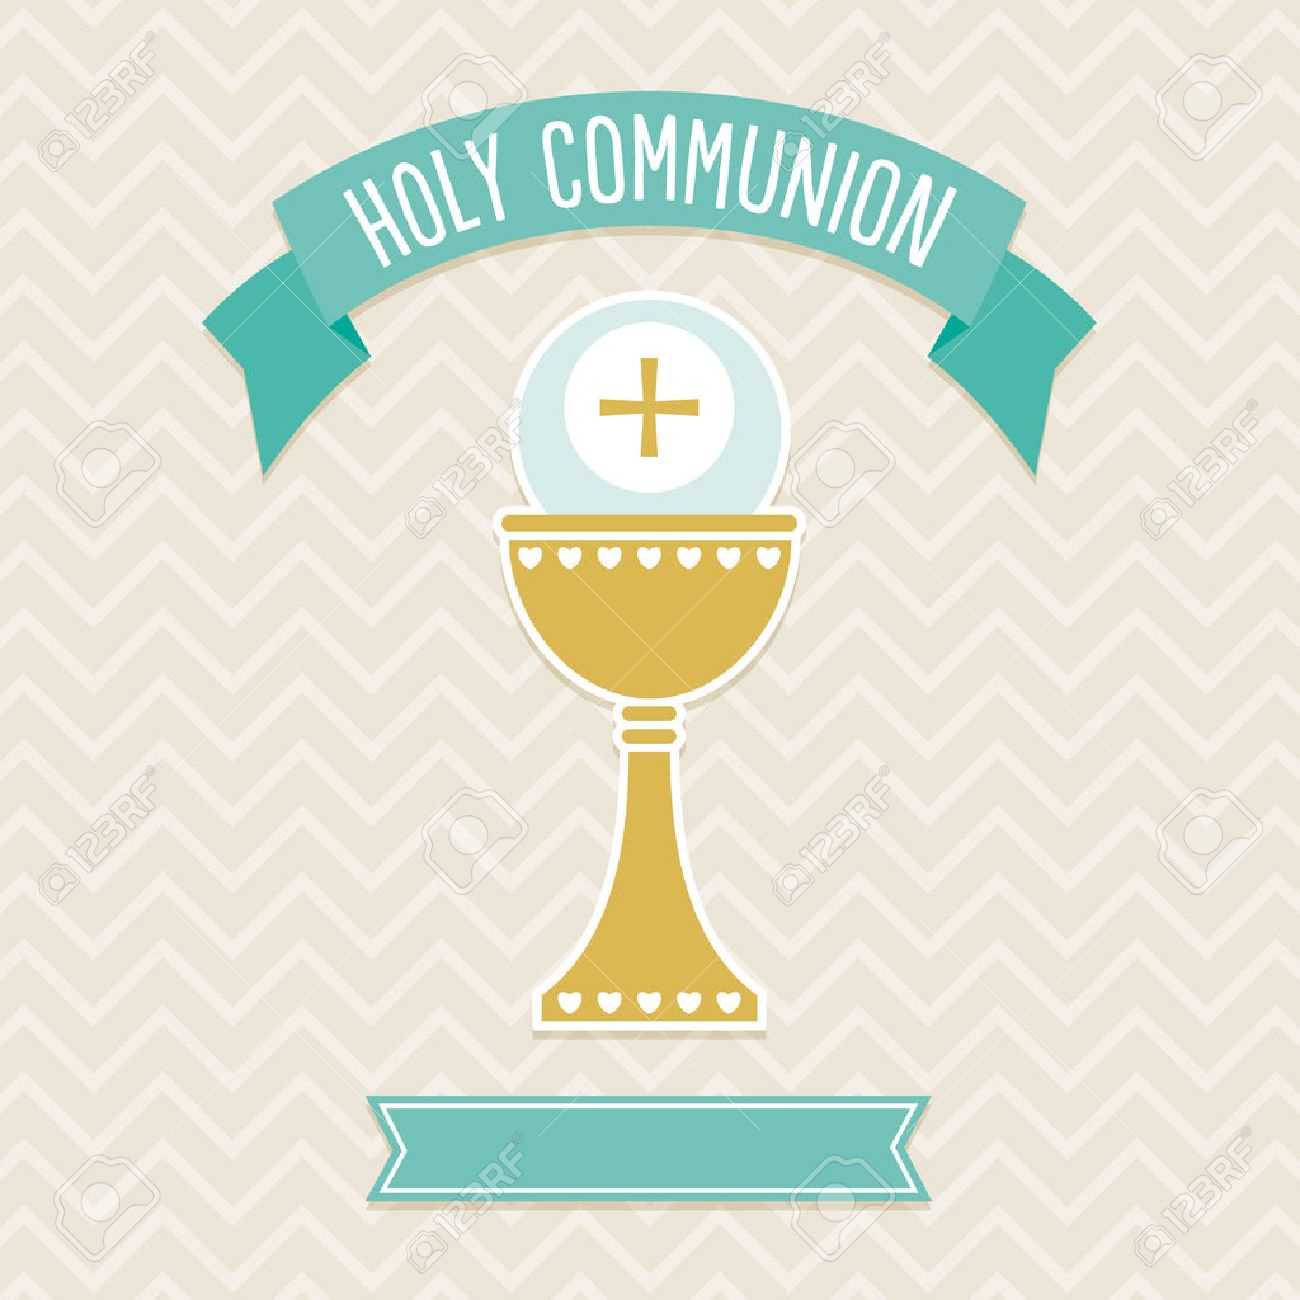 First Holy Communion Card Template In Cream And Aqua With Copy.. With Regard To First Communion Banner Templates